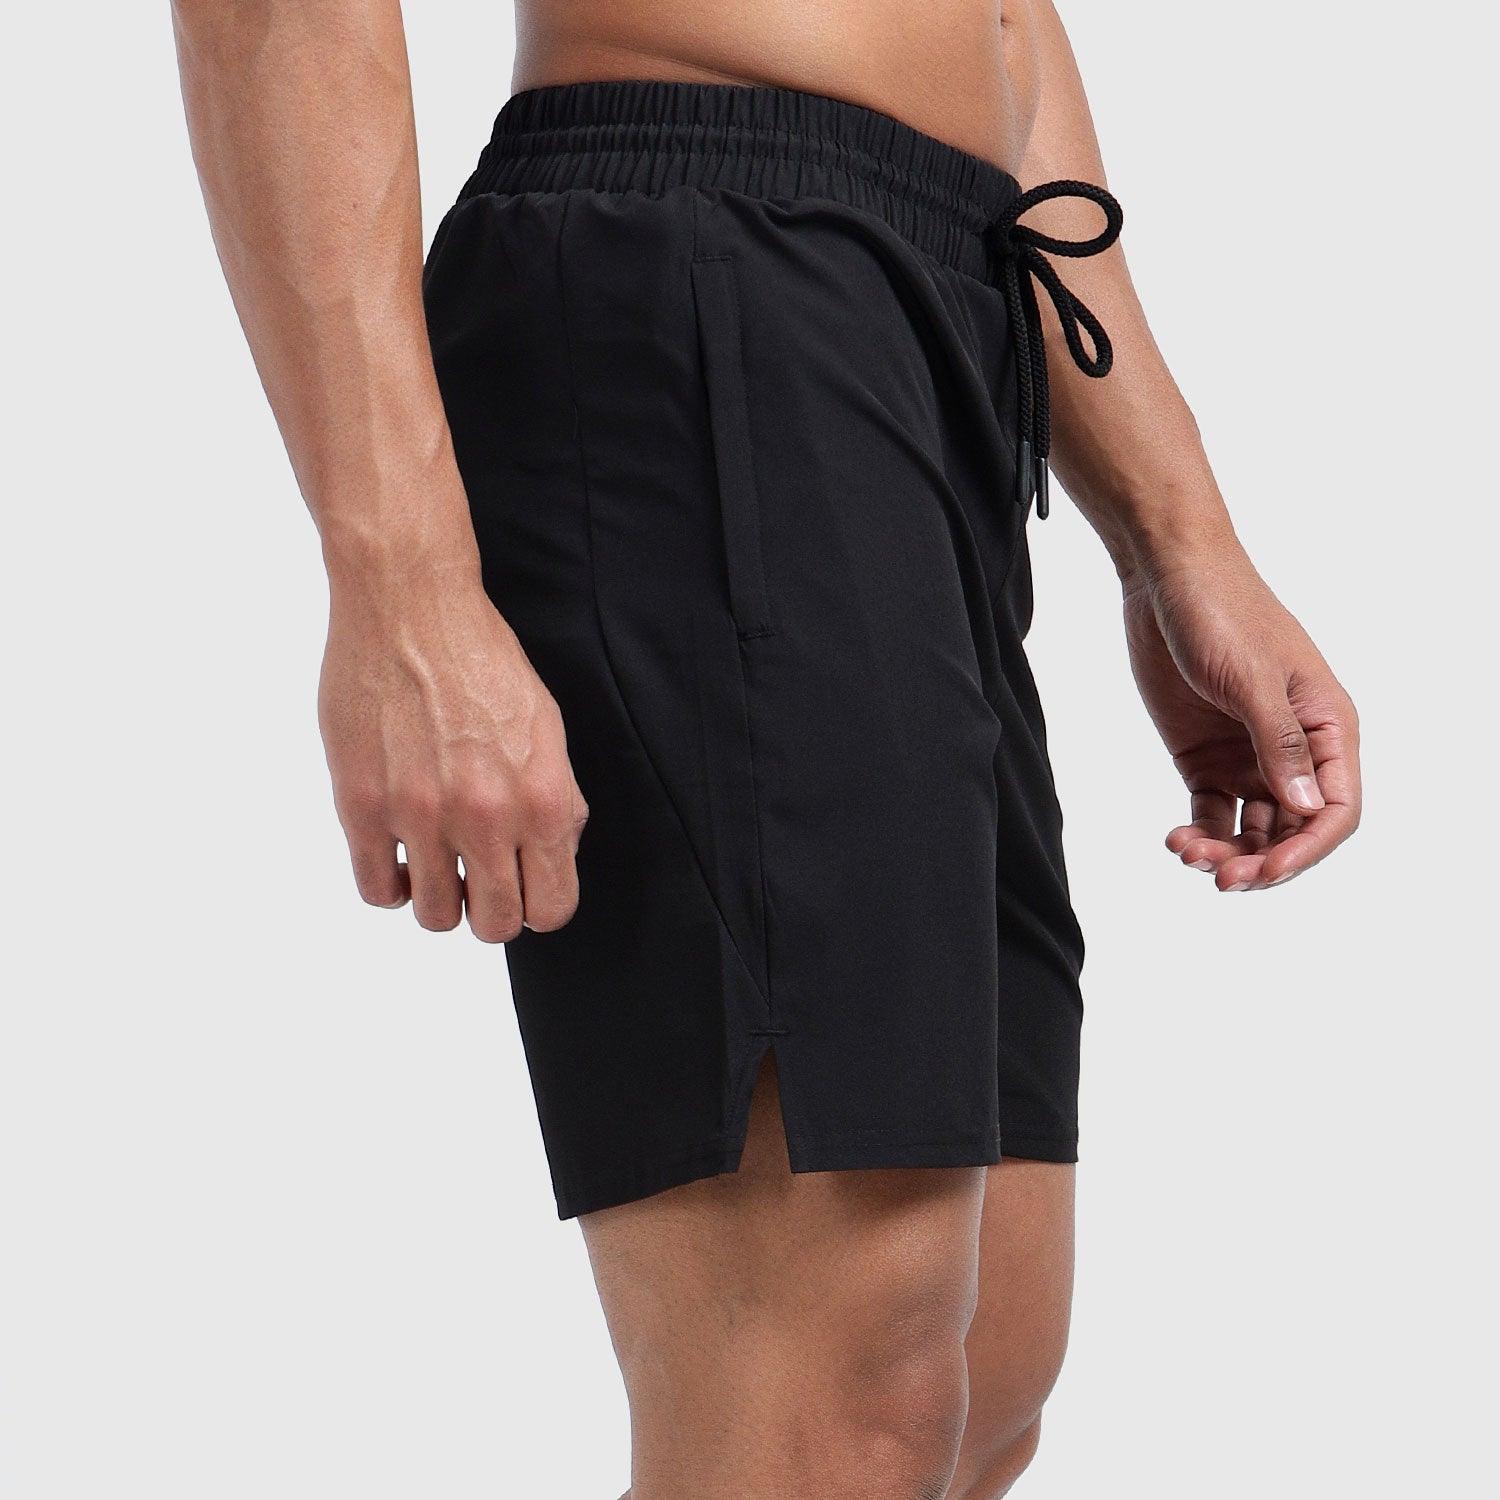 Denmonk's fashionable Coastline Comfort black shorts for men will boost your level of gym fitness.